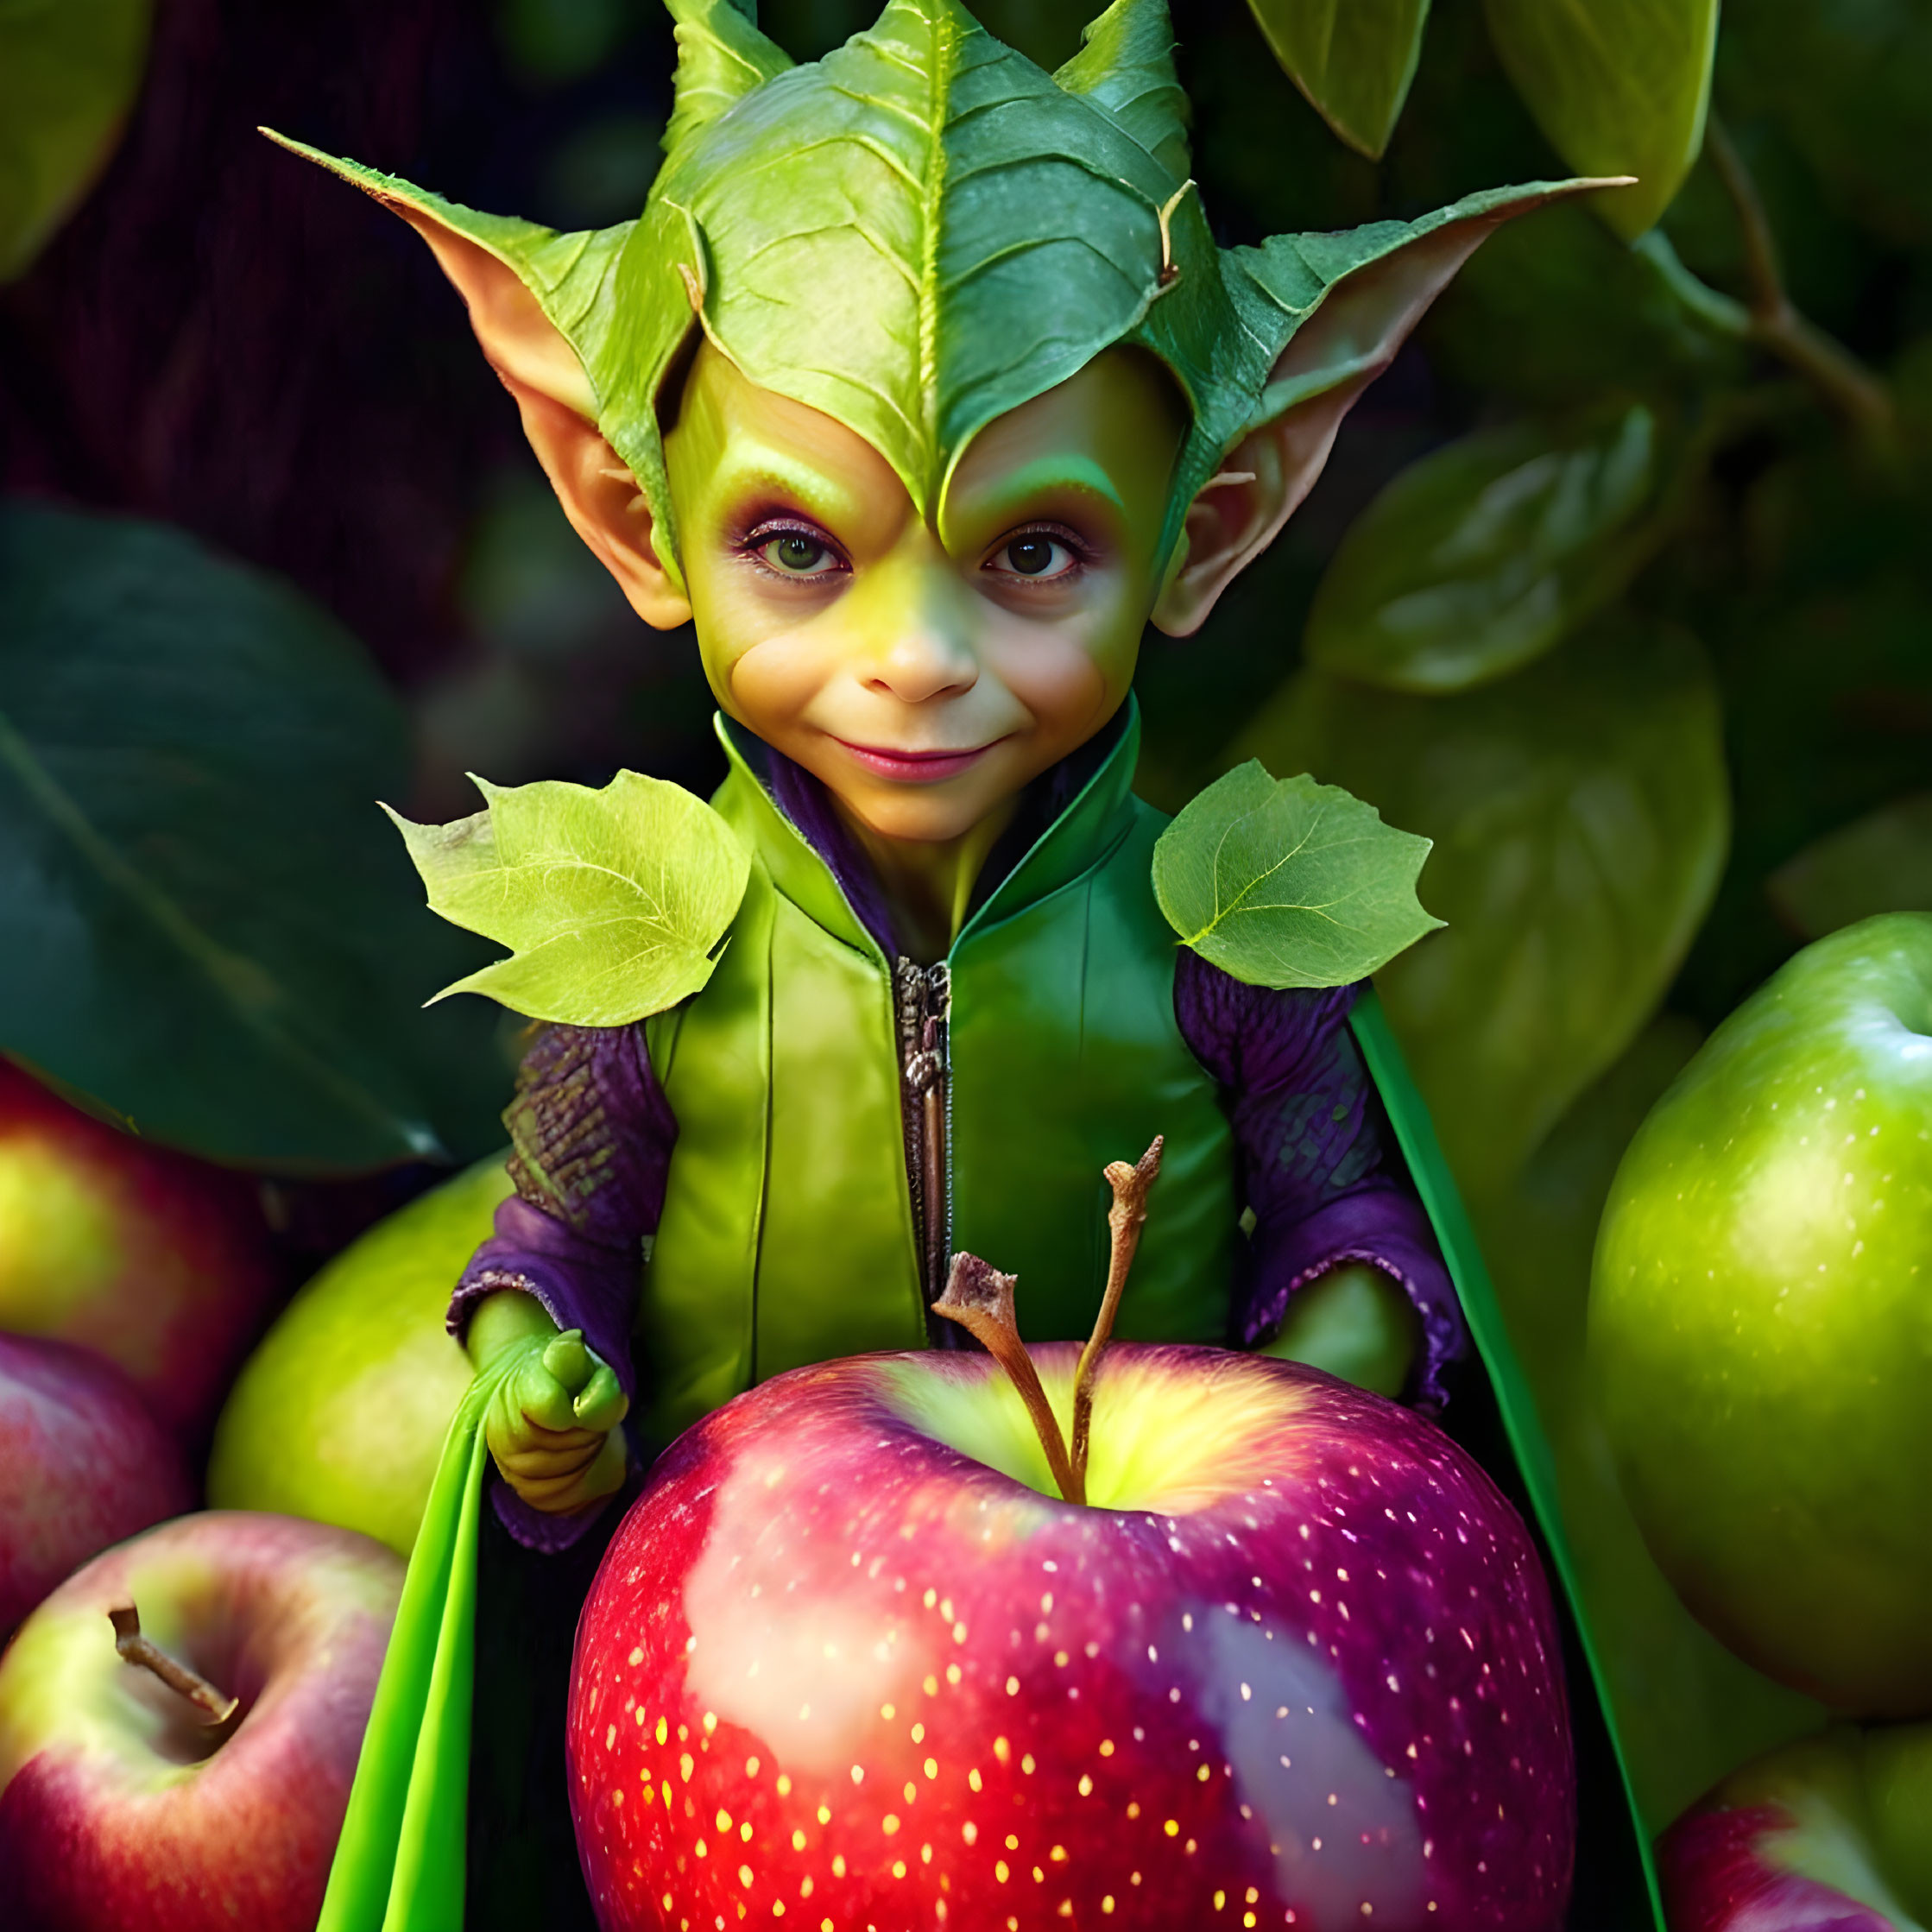 Green elf with apple in whimsical illustration